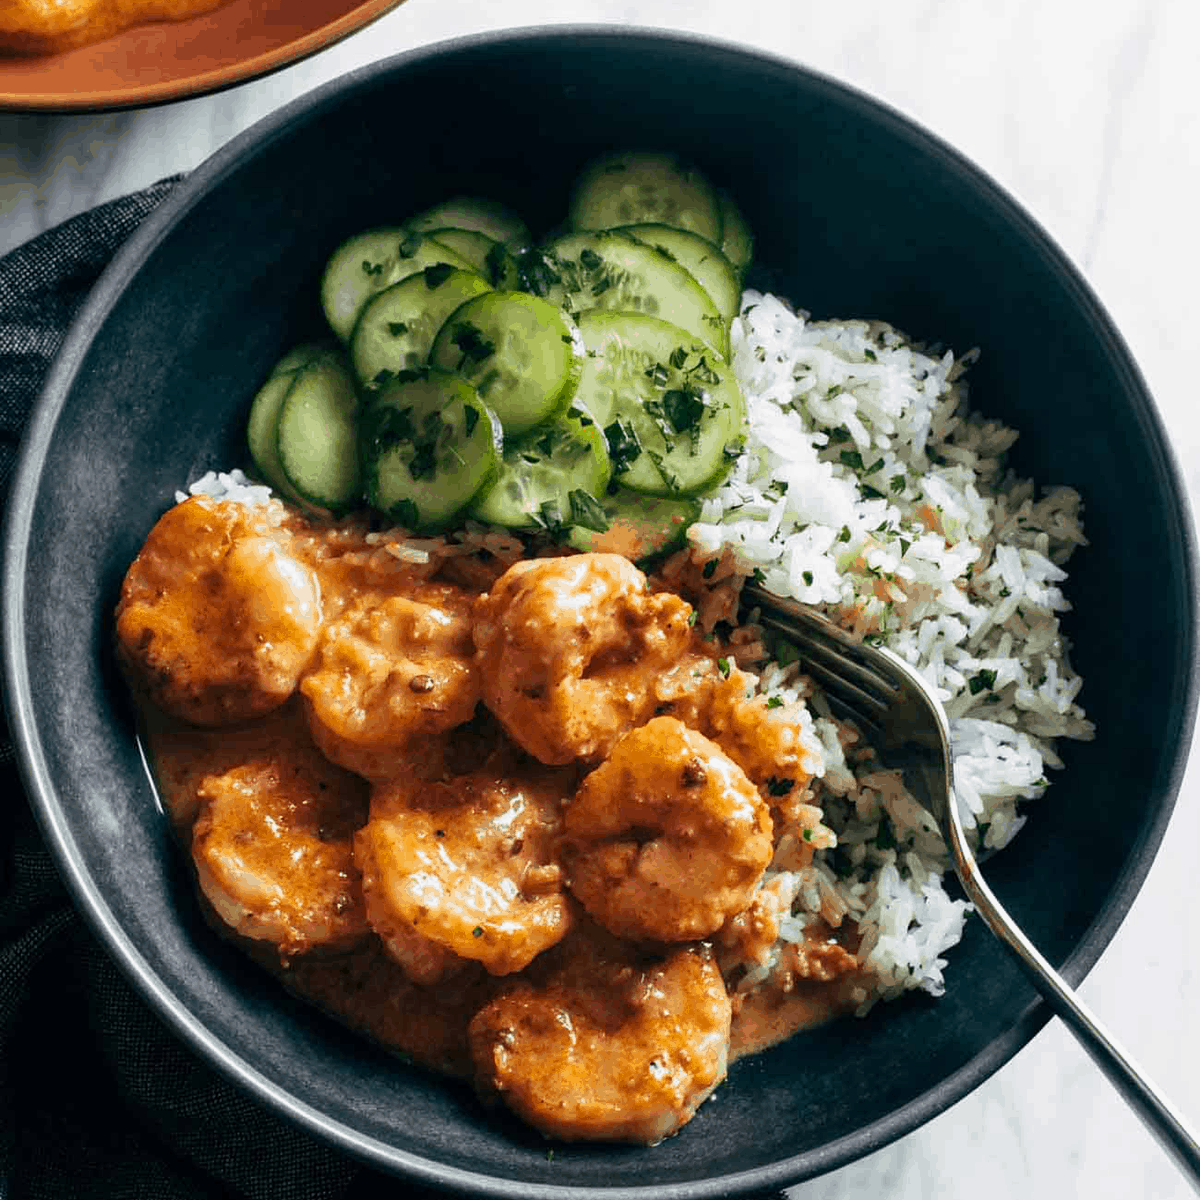 Chipotle orange shrimp in a bowl with cucumbers and cilantro rice.